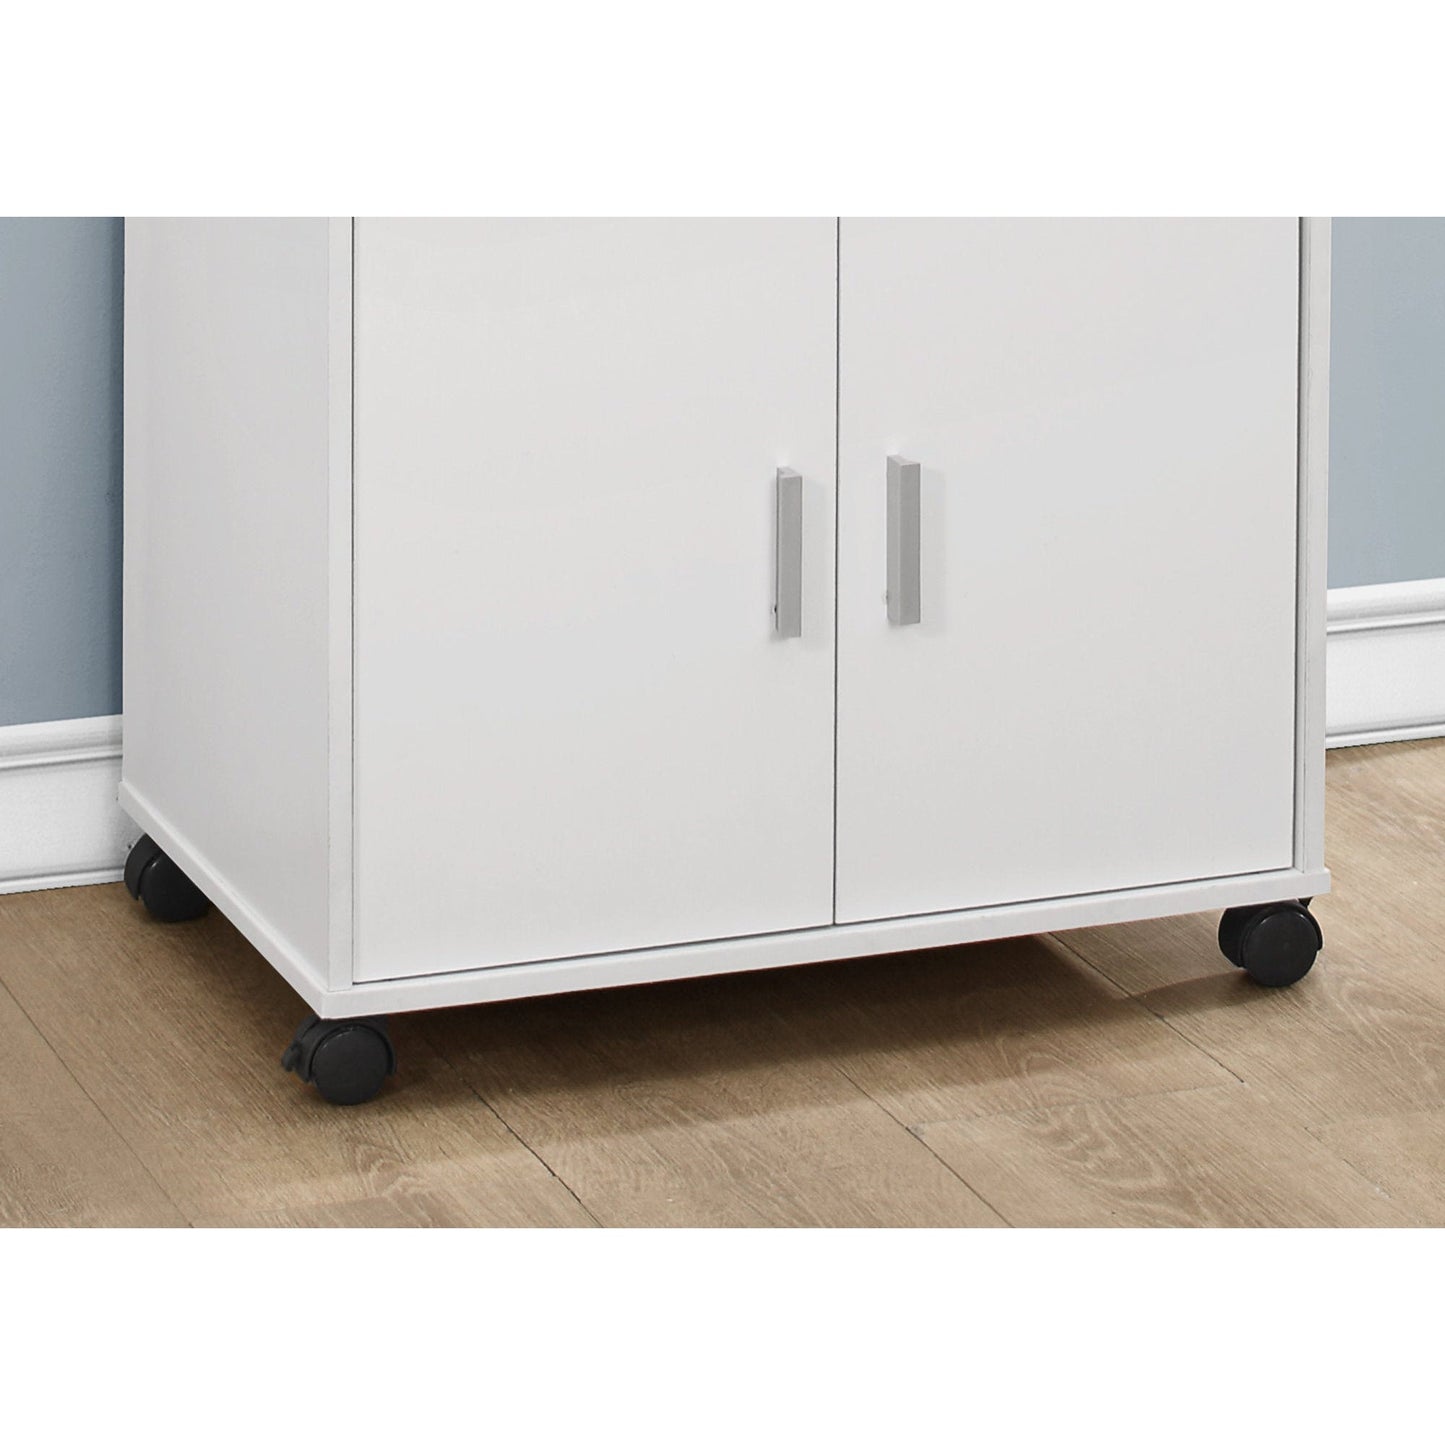 HomeRoots 15.25" x 22" x 33" Particle Board Laminate Kitchen Cart in White Finish